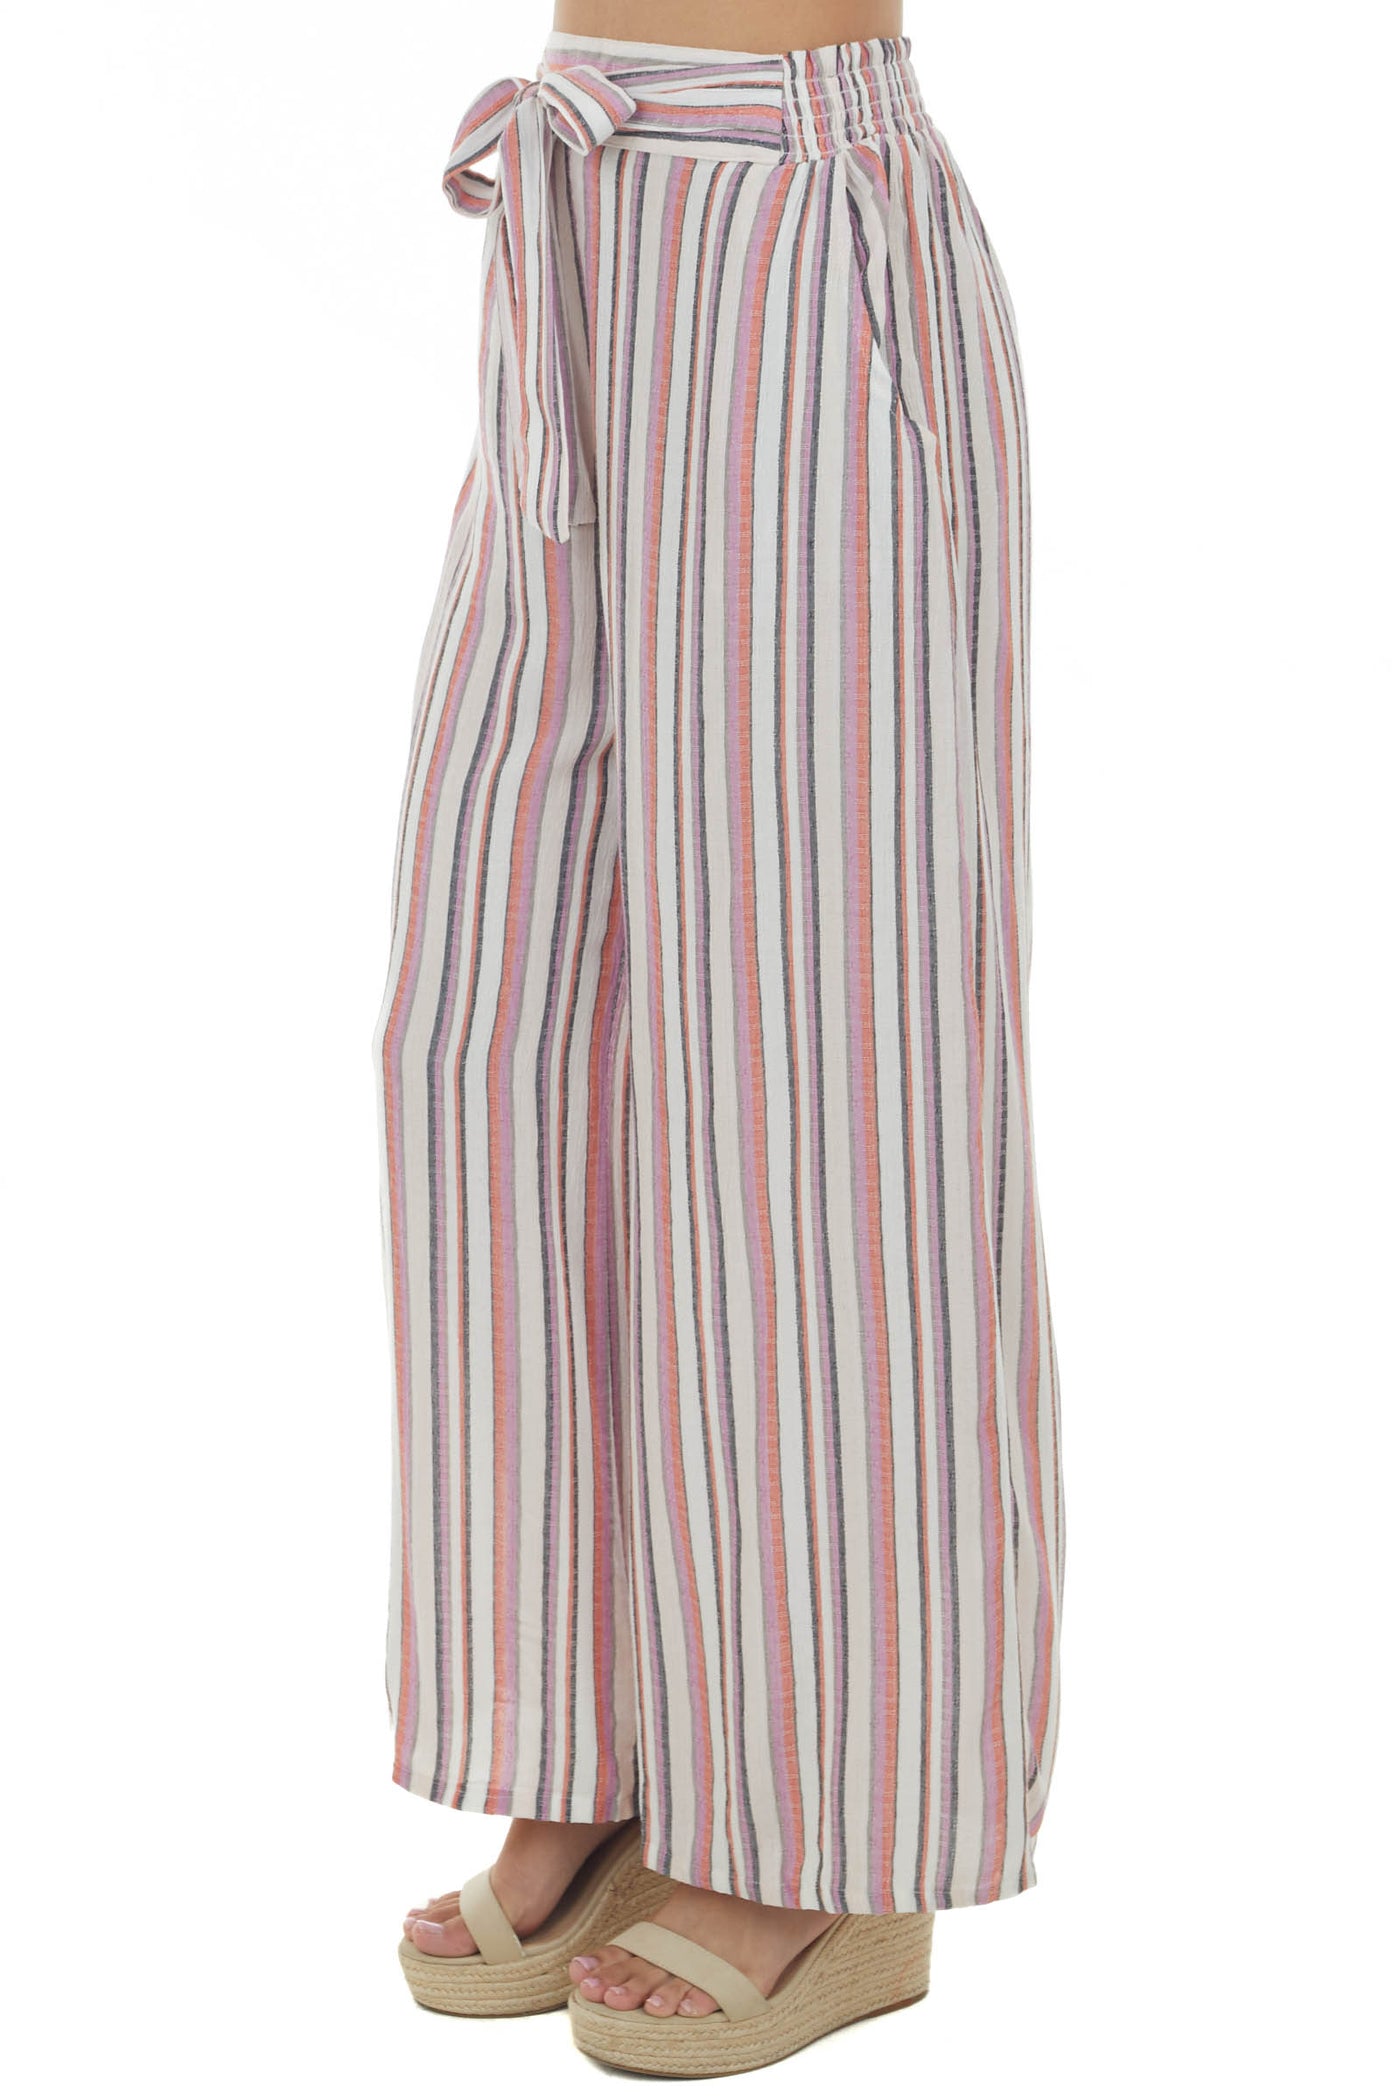 Coral Striped Pants with Smocked Waist Tie